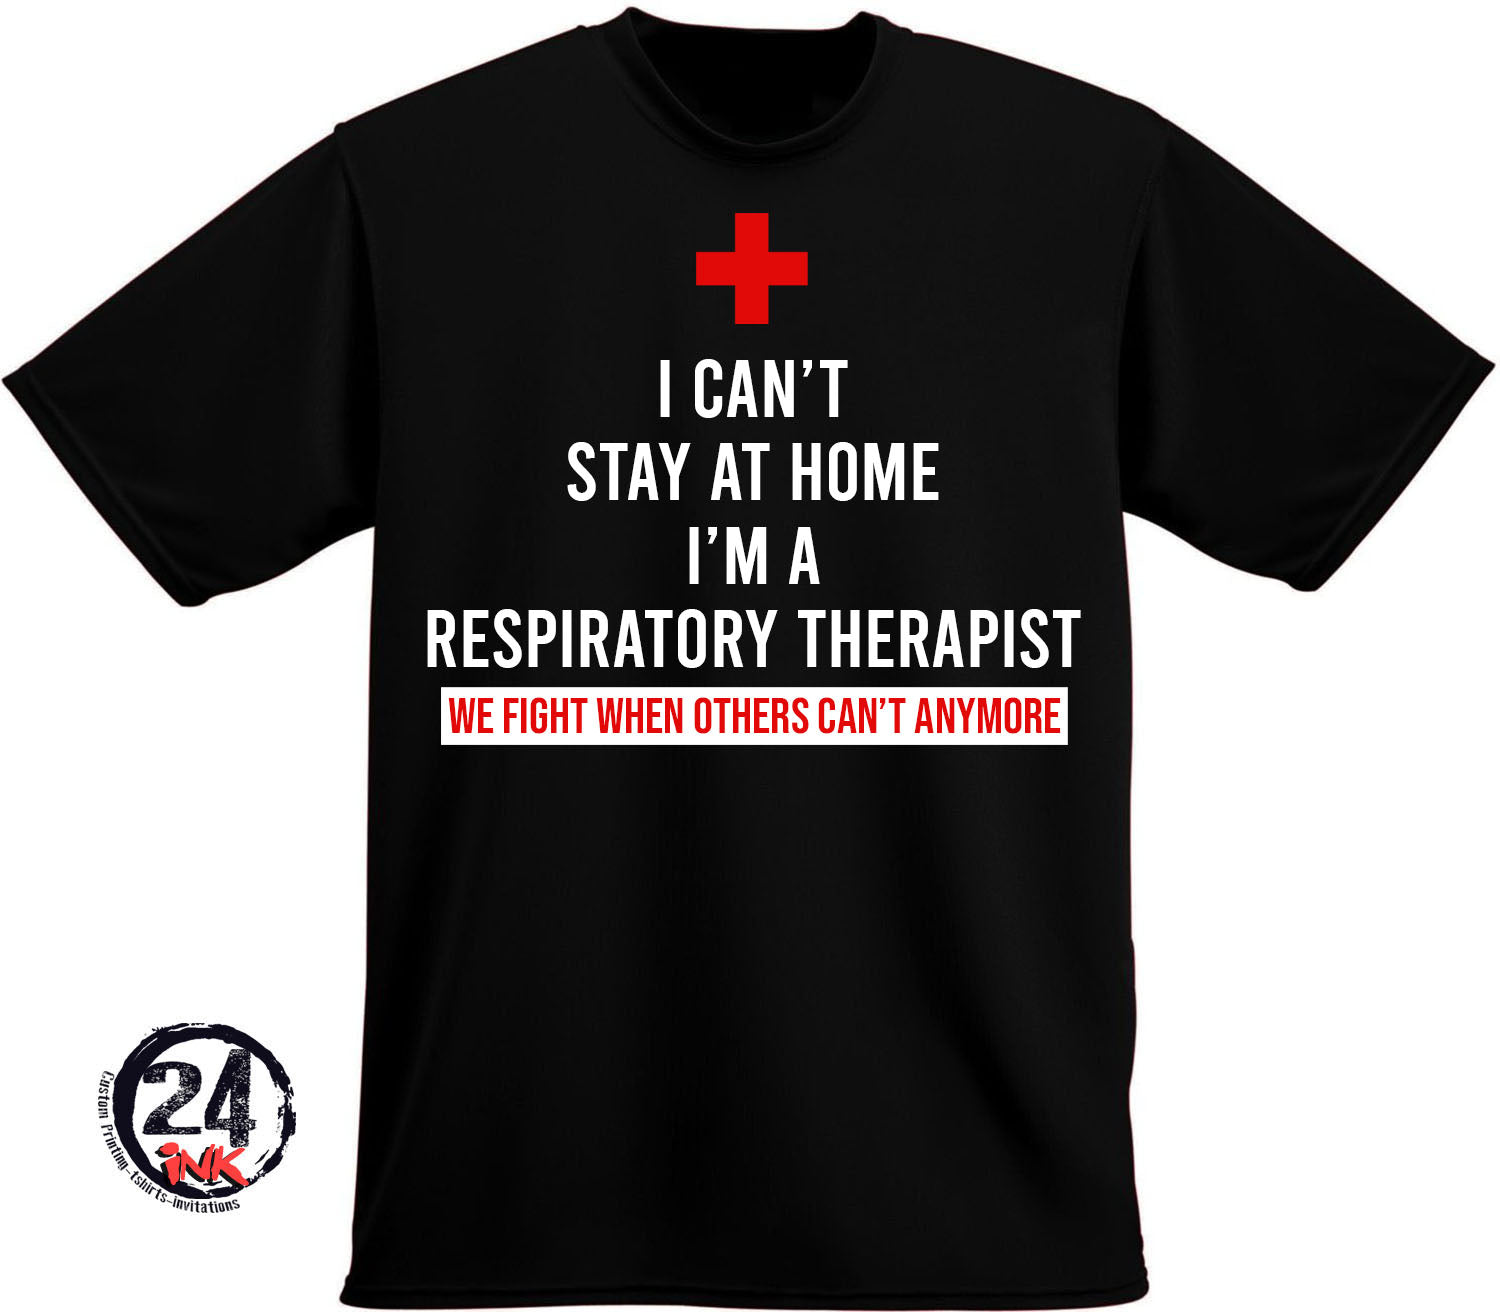 I can't stay home t-shirt, nurse, Respiratory Therapist